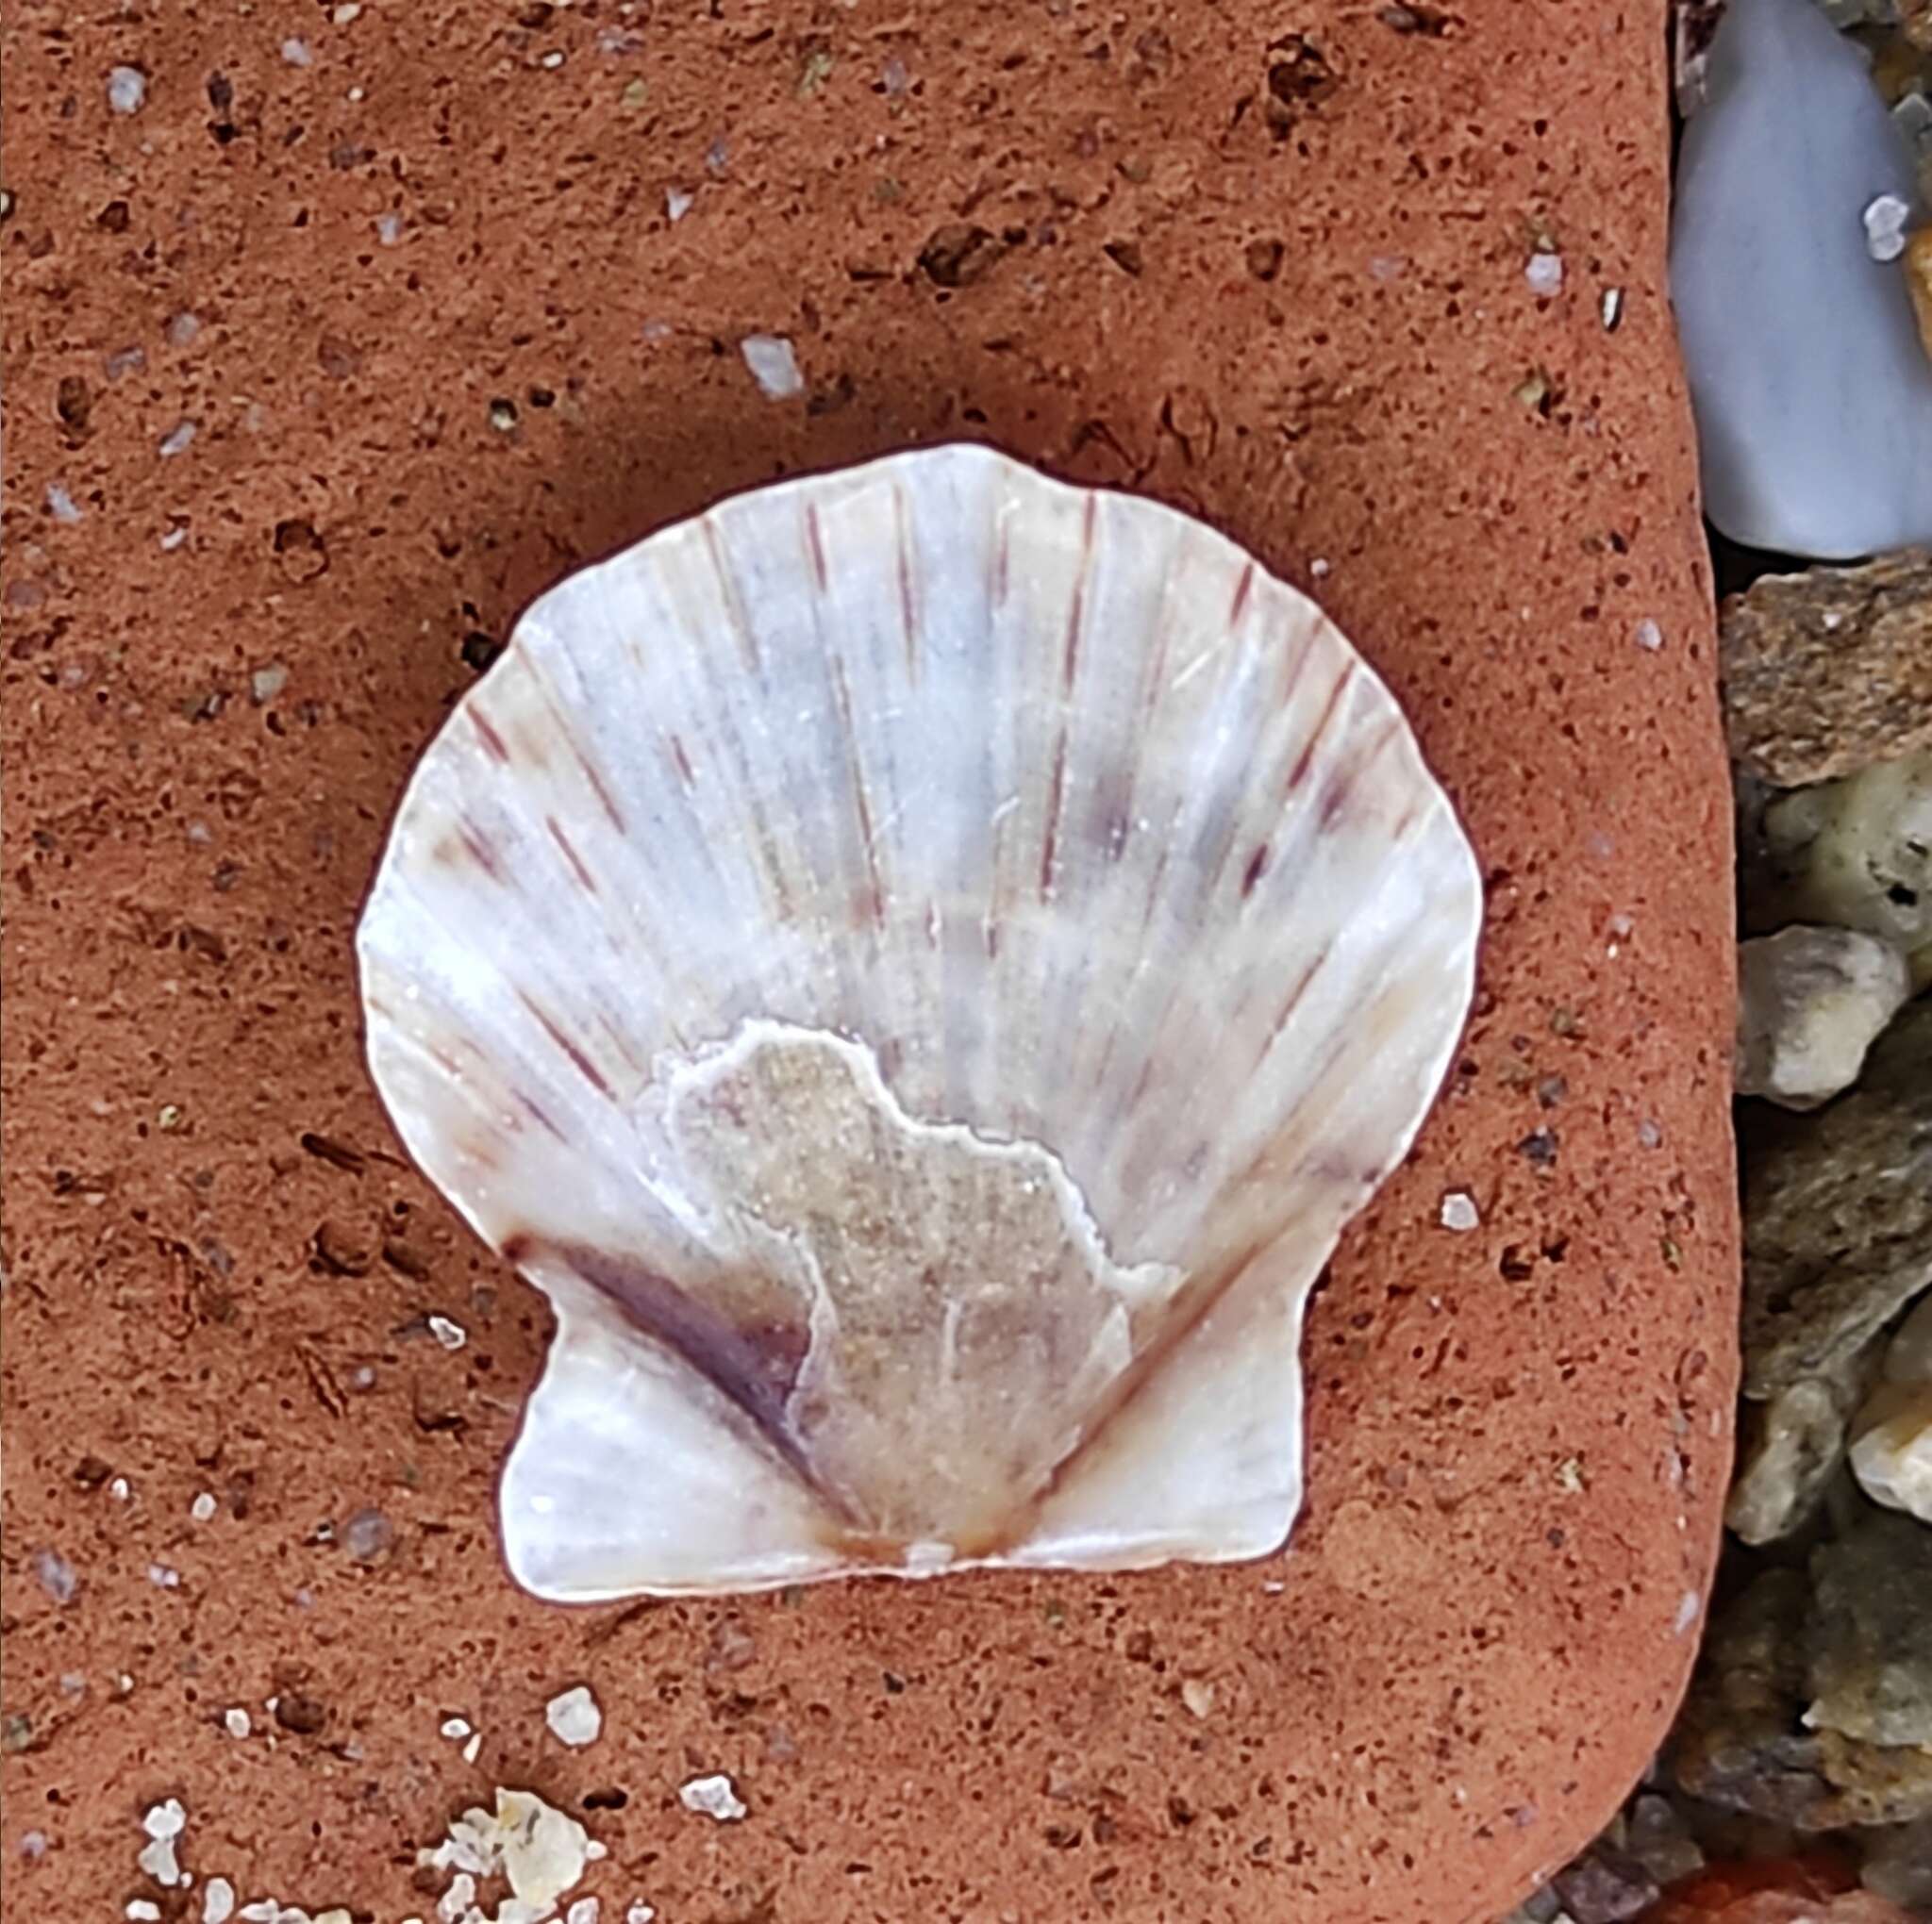 Image of hyaline scallop